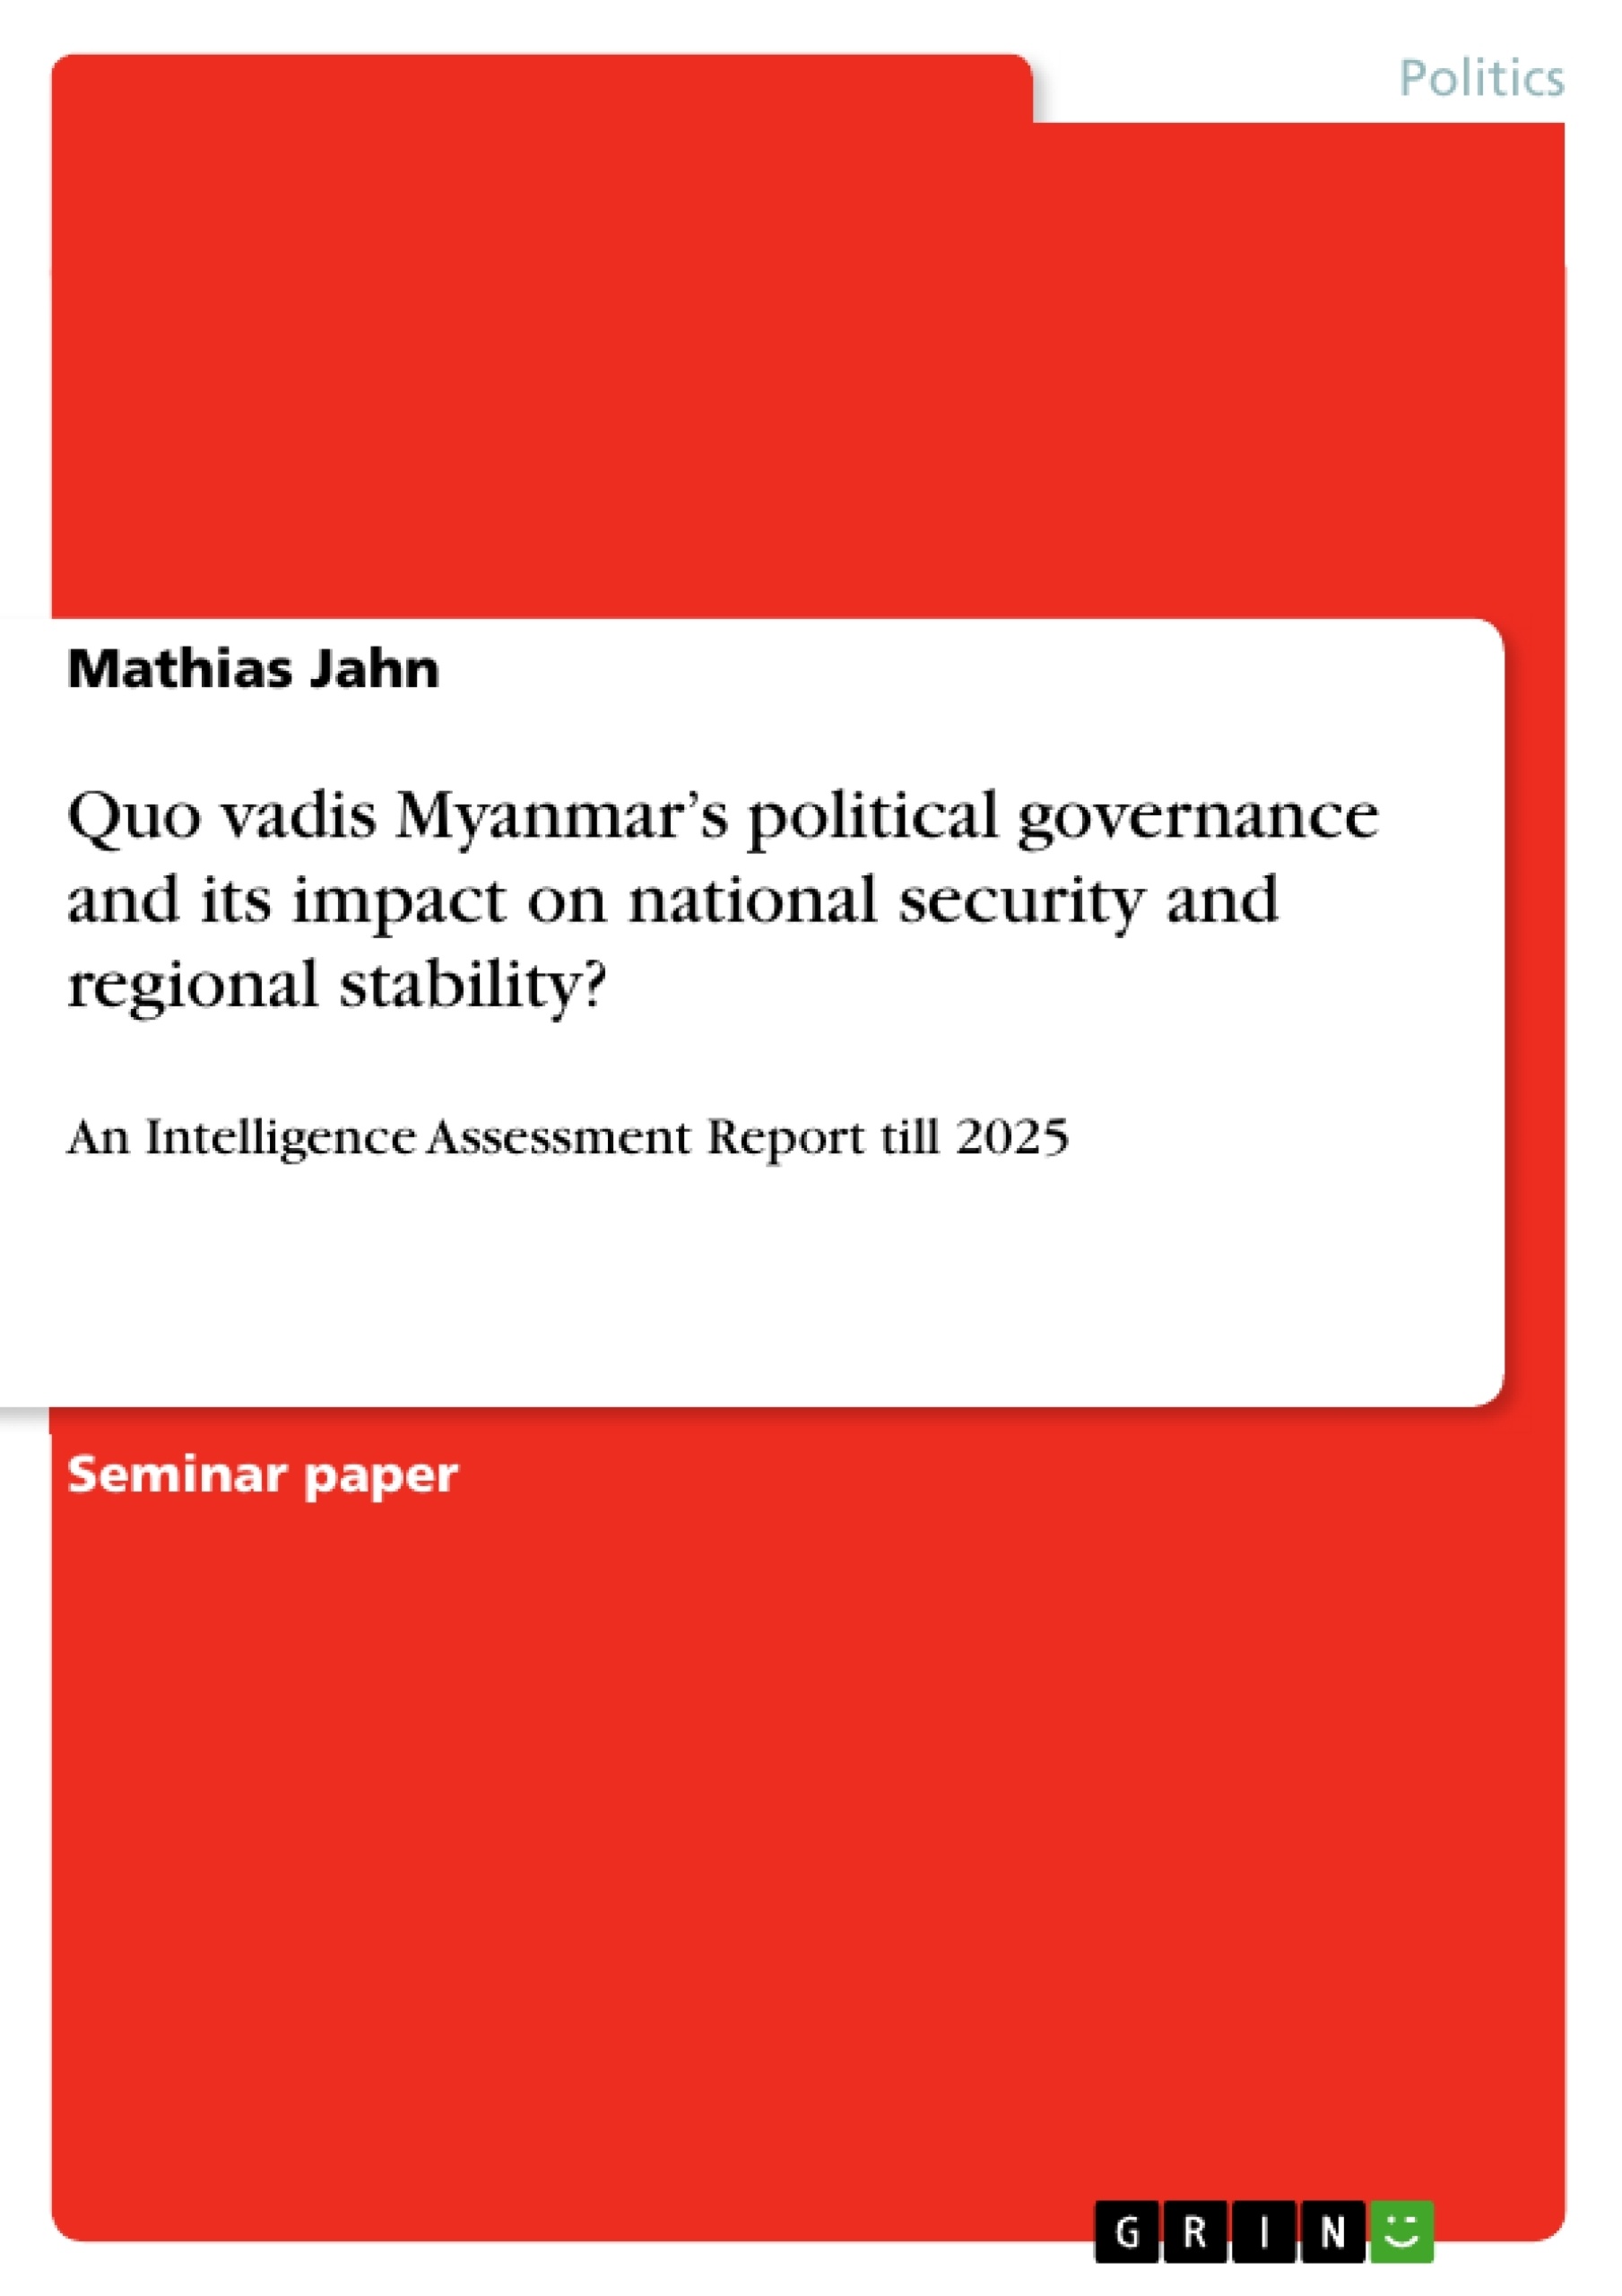 Title: Quo vadis Myanmar’s political governance and its impact on national security and regional stability?